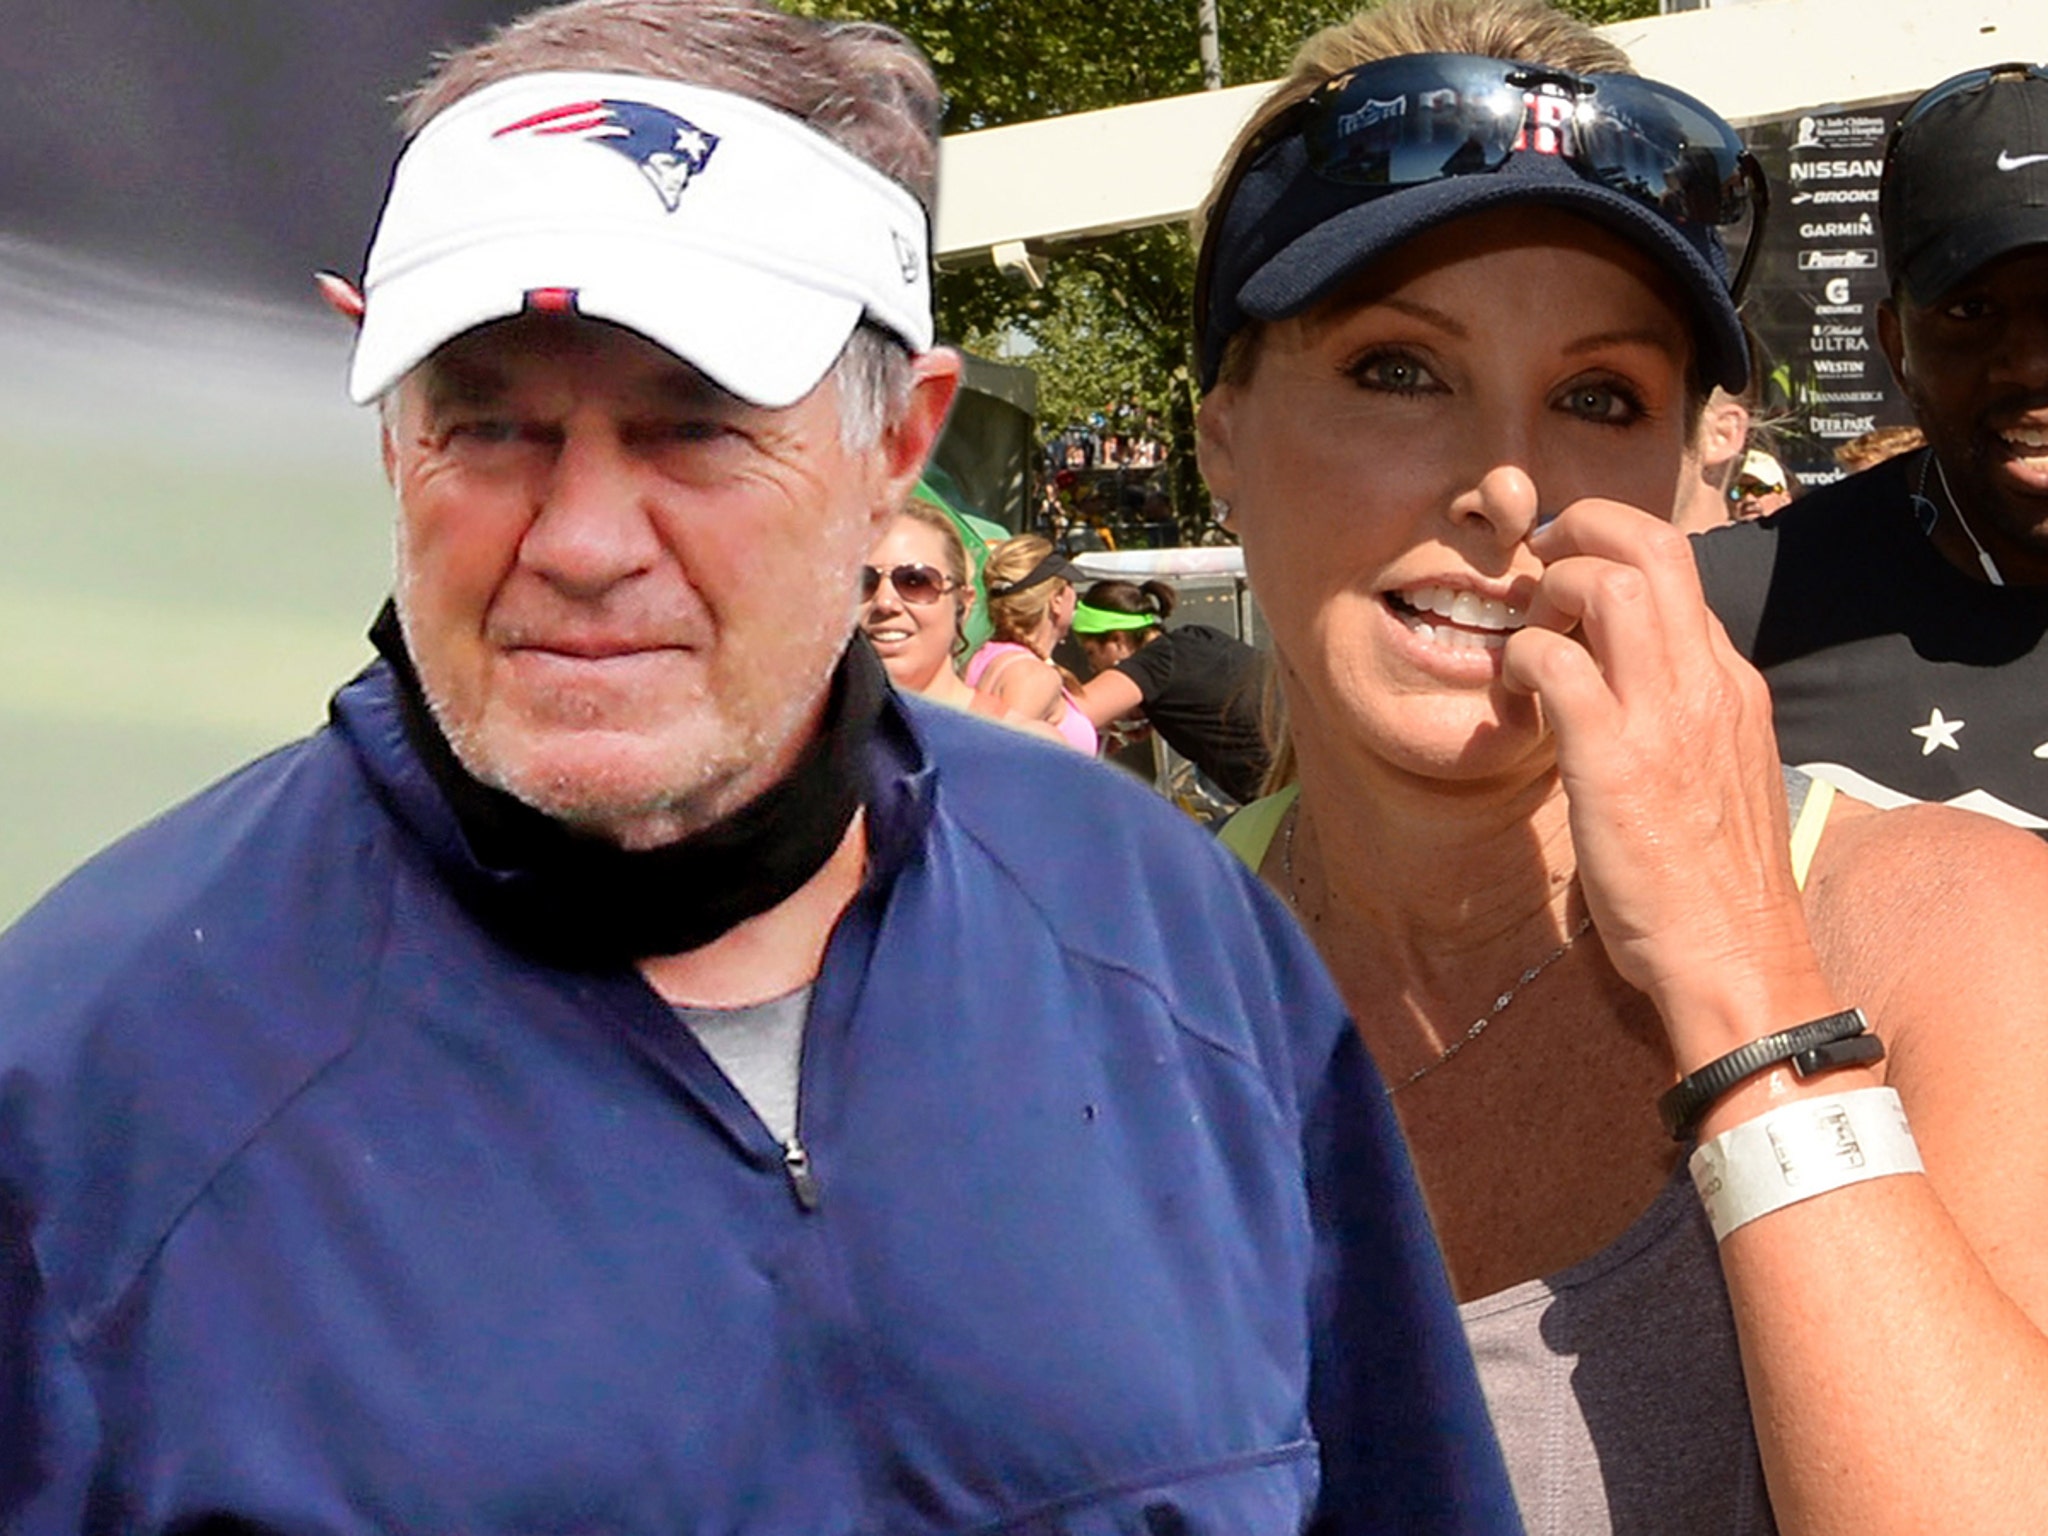 The TB12 drama, explained: Inside Bill Belichick's feud with Tom